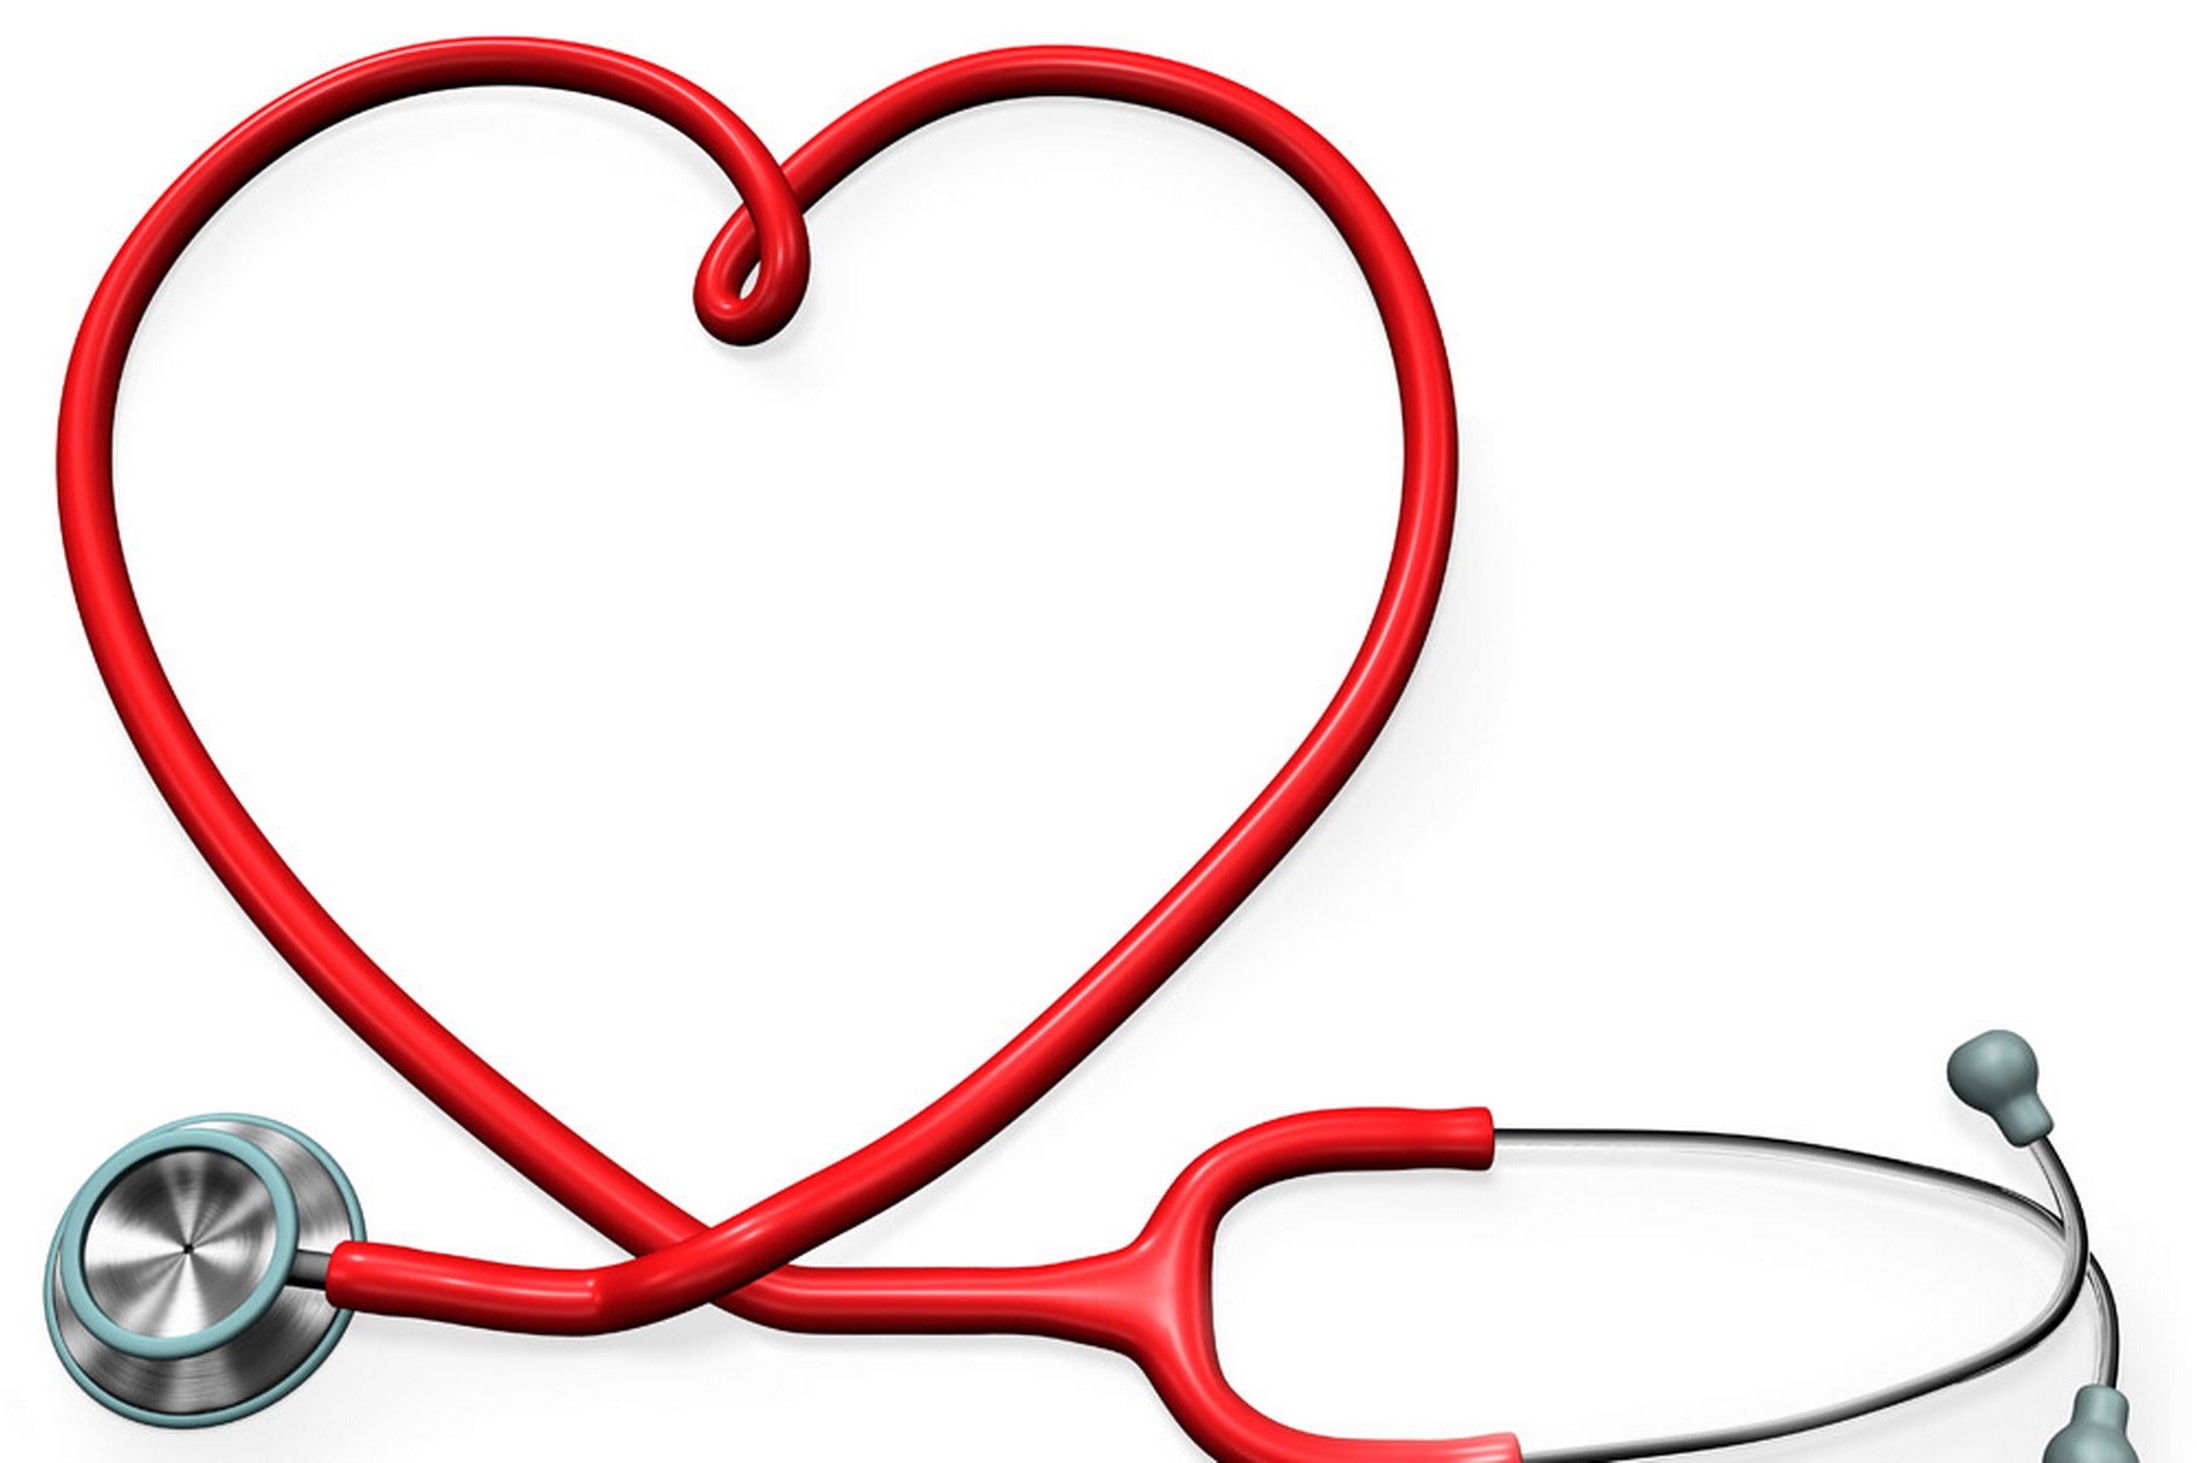 80 Heart Stethoscope free clipart.